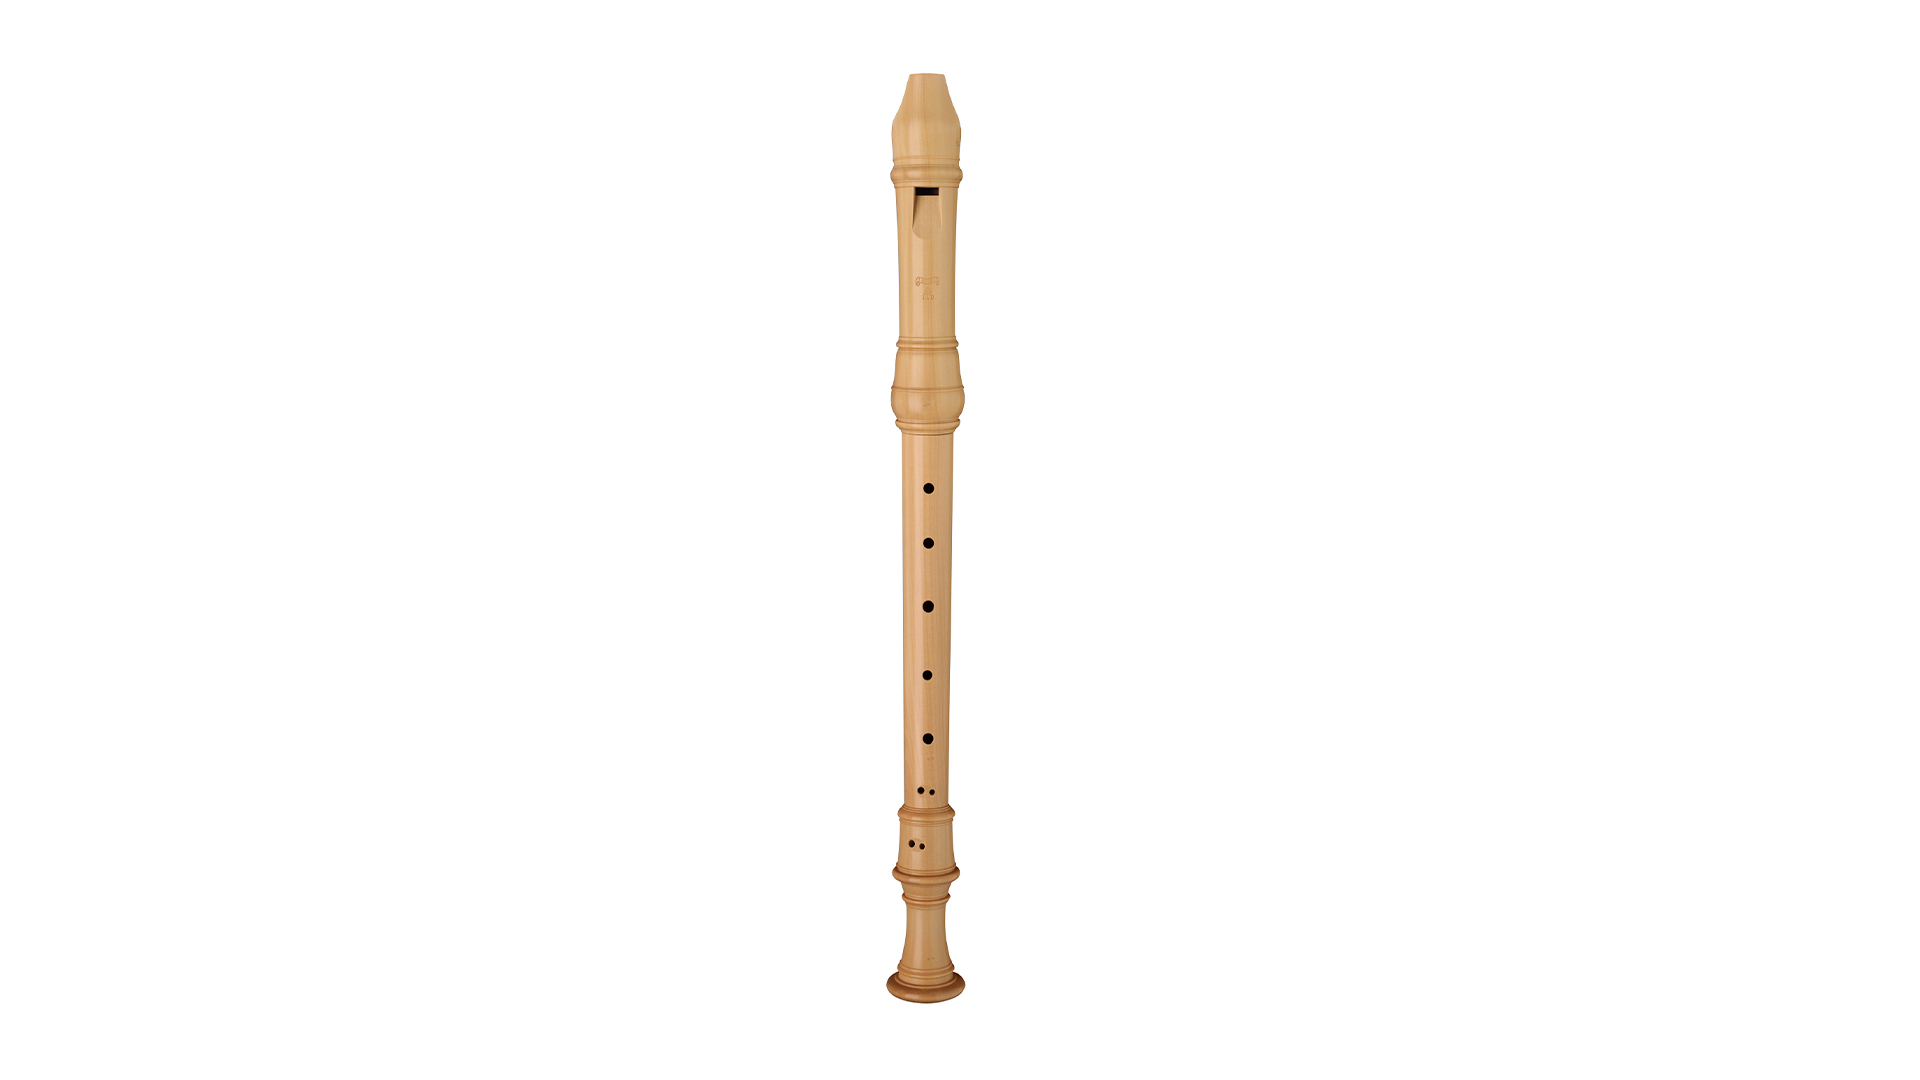 Moeck, "Denner", alto in f', baroque double hole, 415 Hz, boxwood